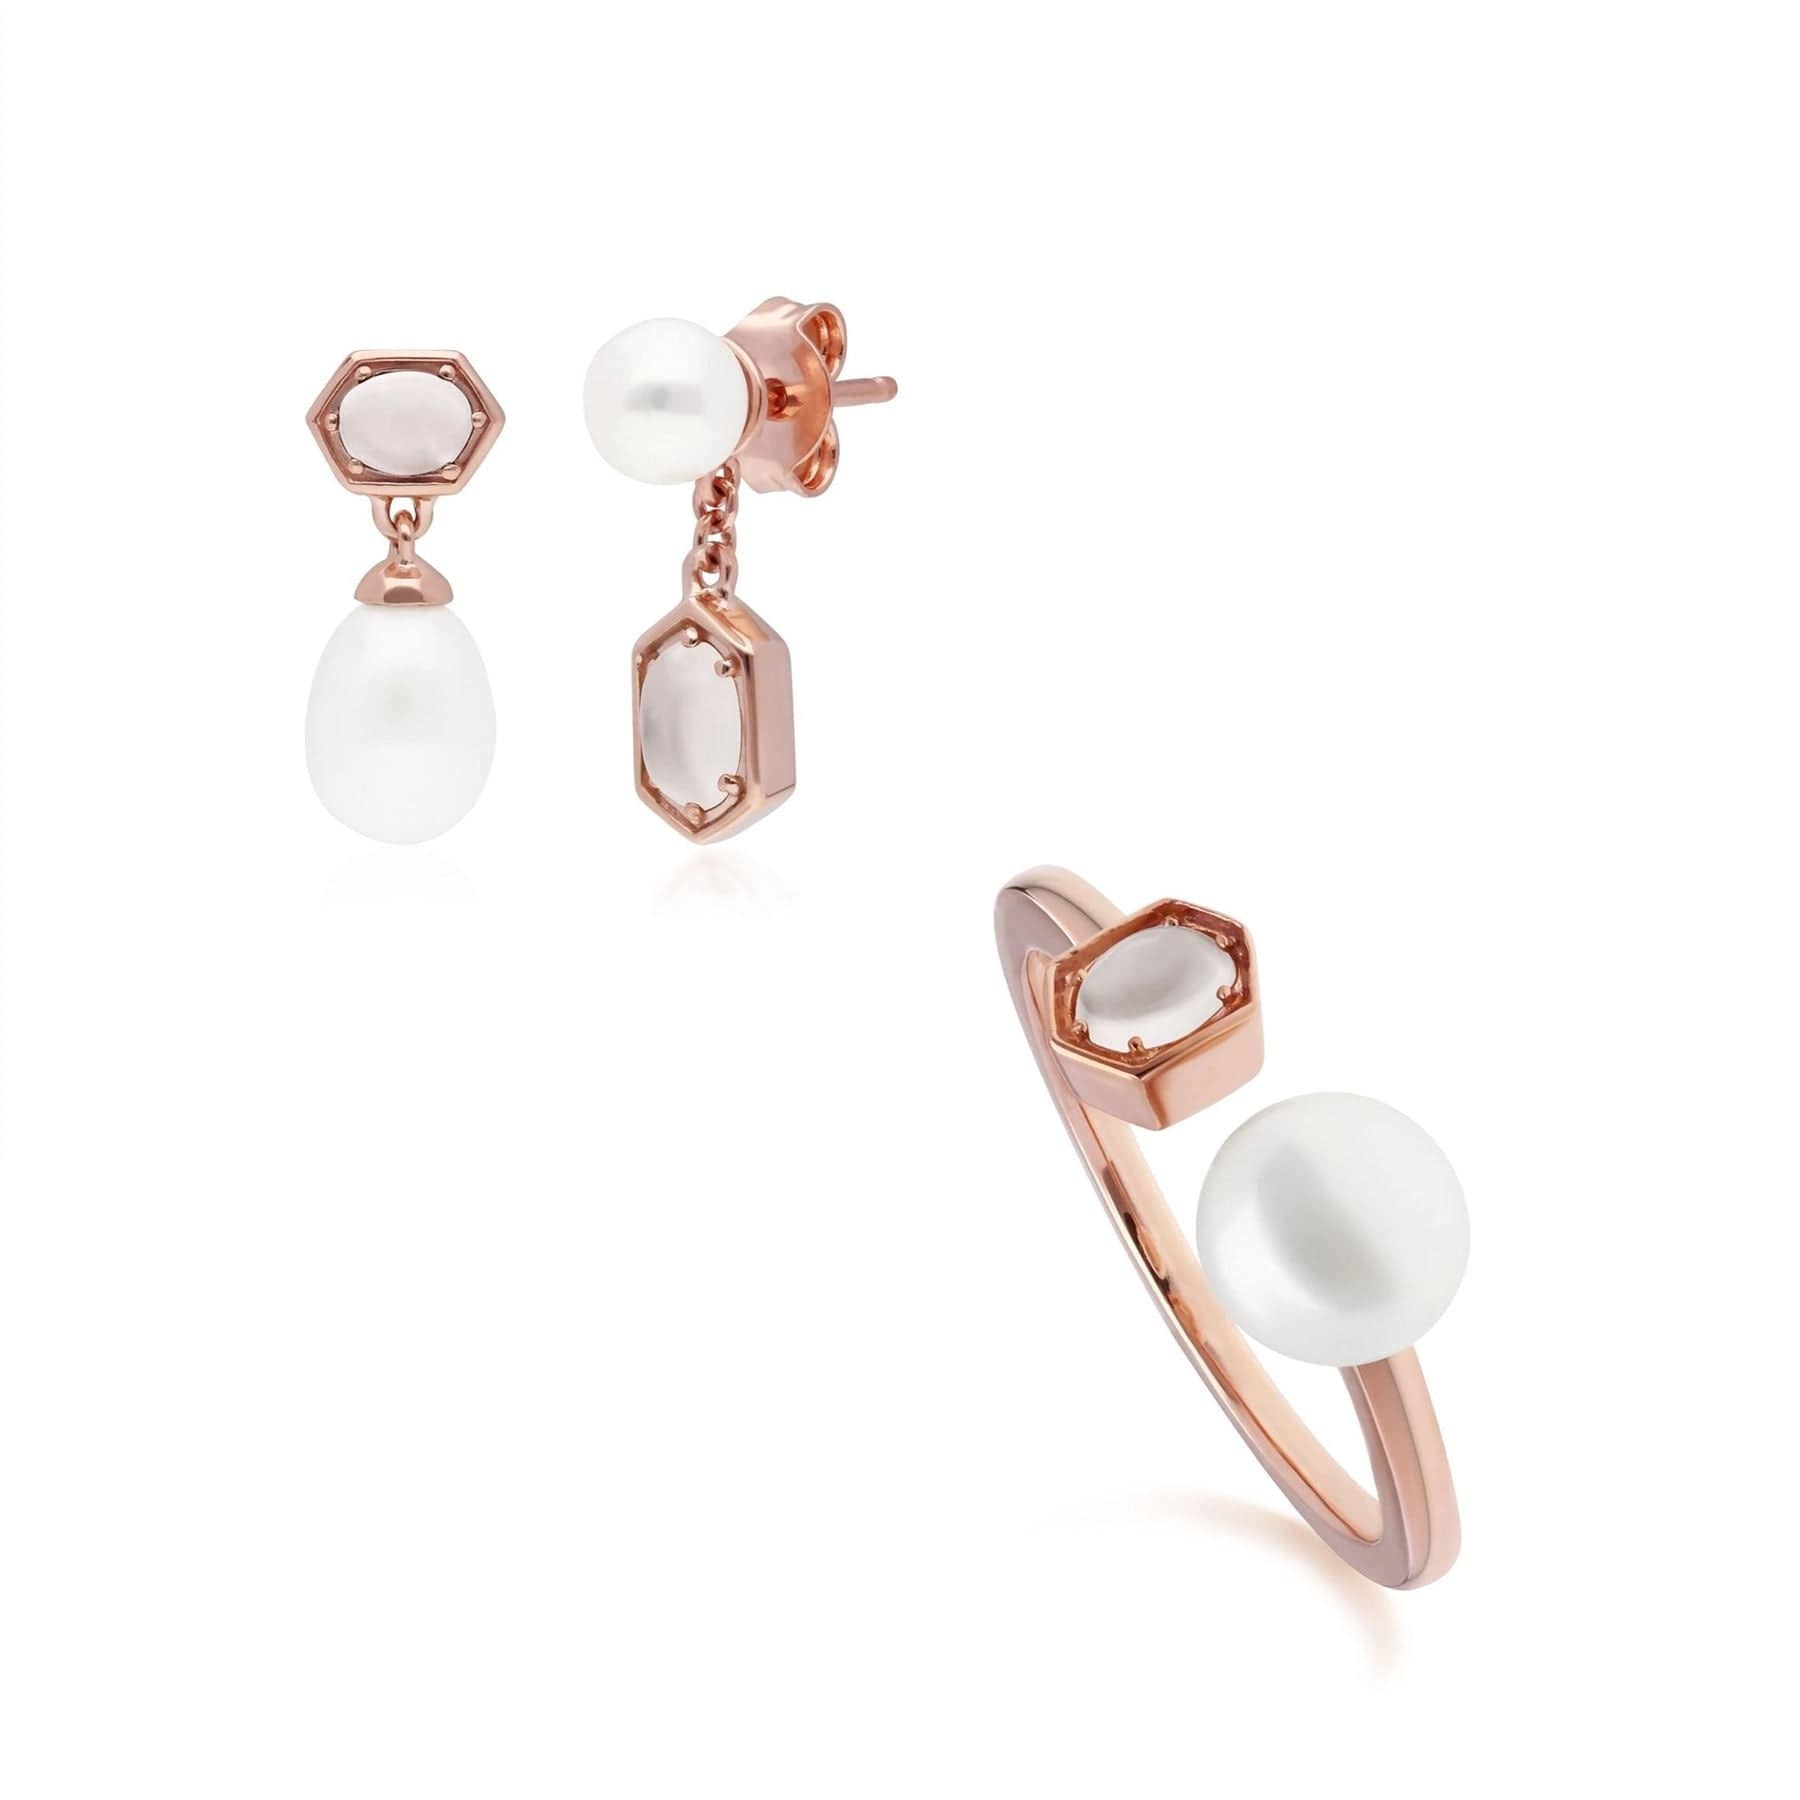 Modern Pearl & Moonstone Earring & Ring Set in Rose Gold Plated Silver - Gemondo